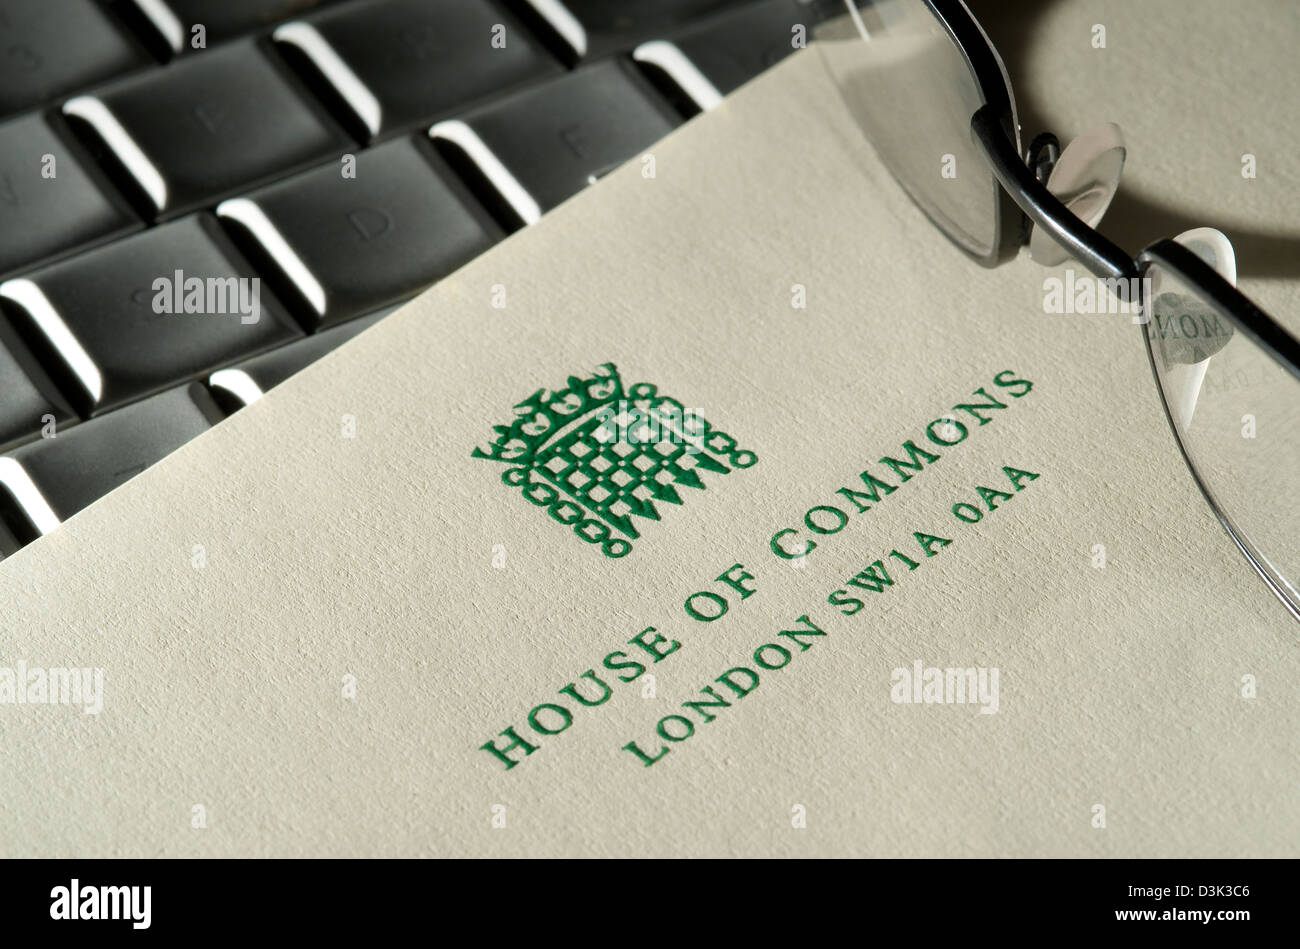 house of commons letterhead on computer keyboard Stock Photo